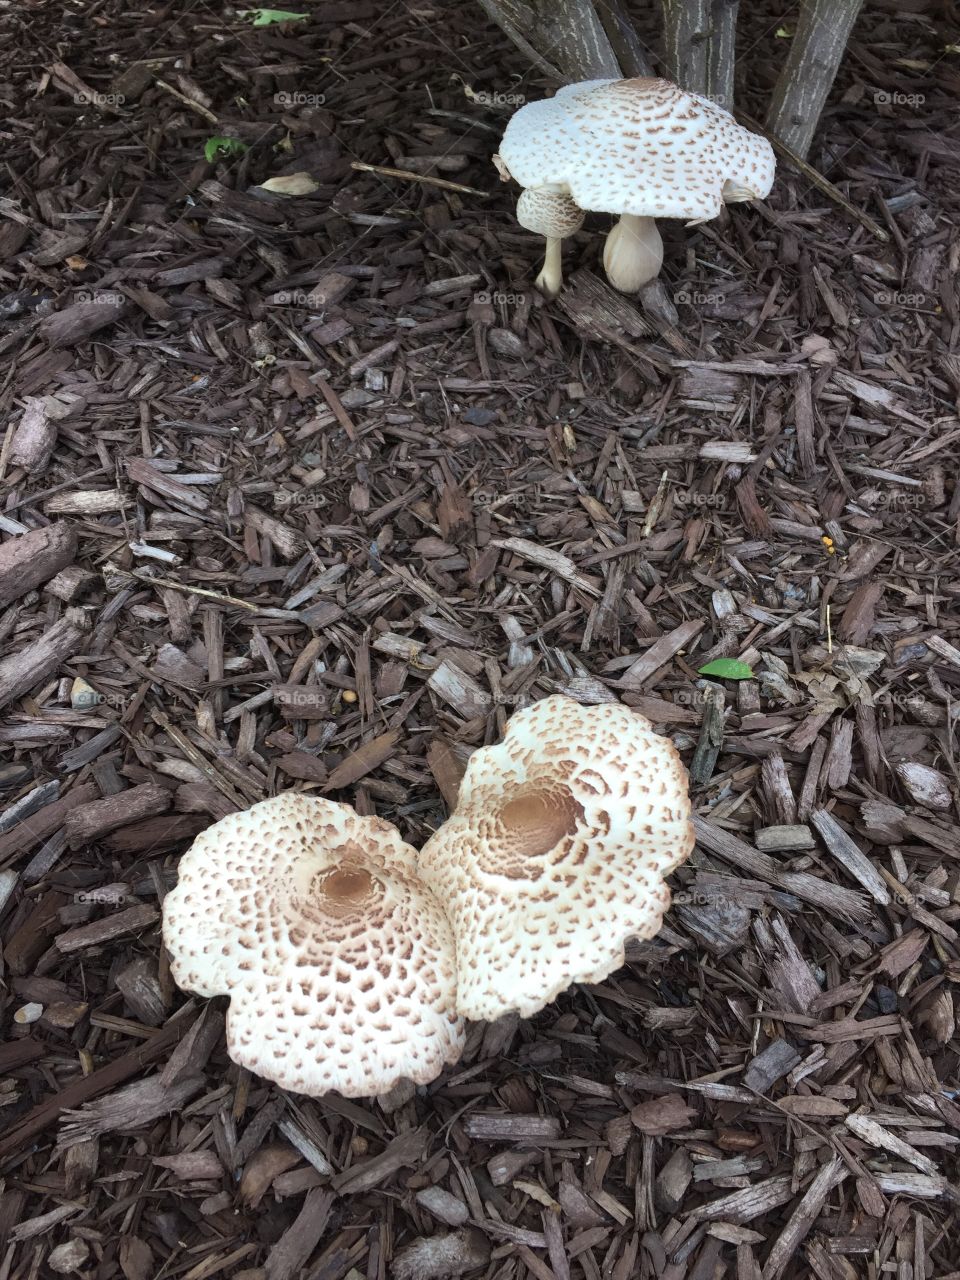 The fungus is among us growing in the mulch, the pattern on this mushroom is striking 